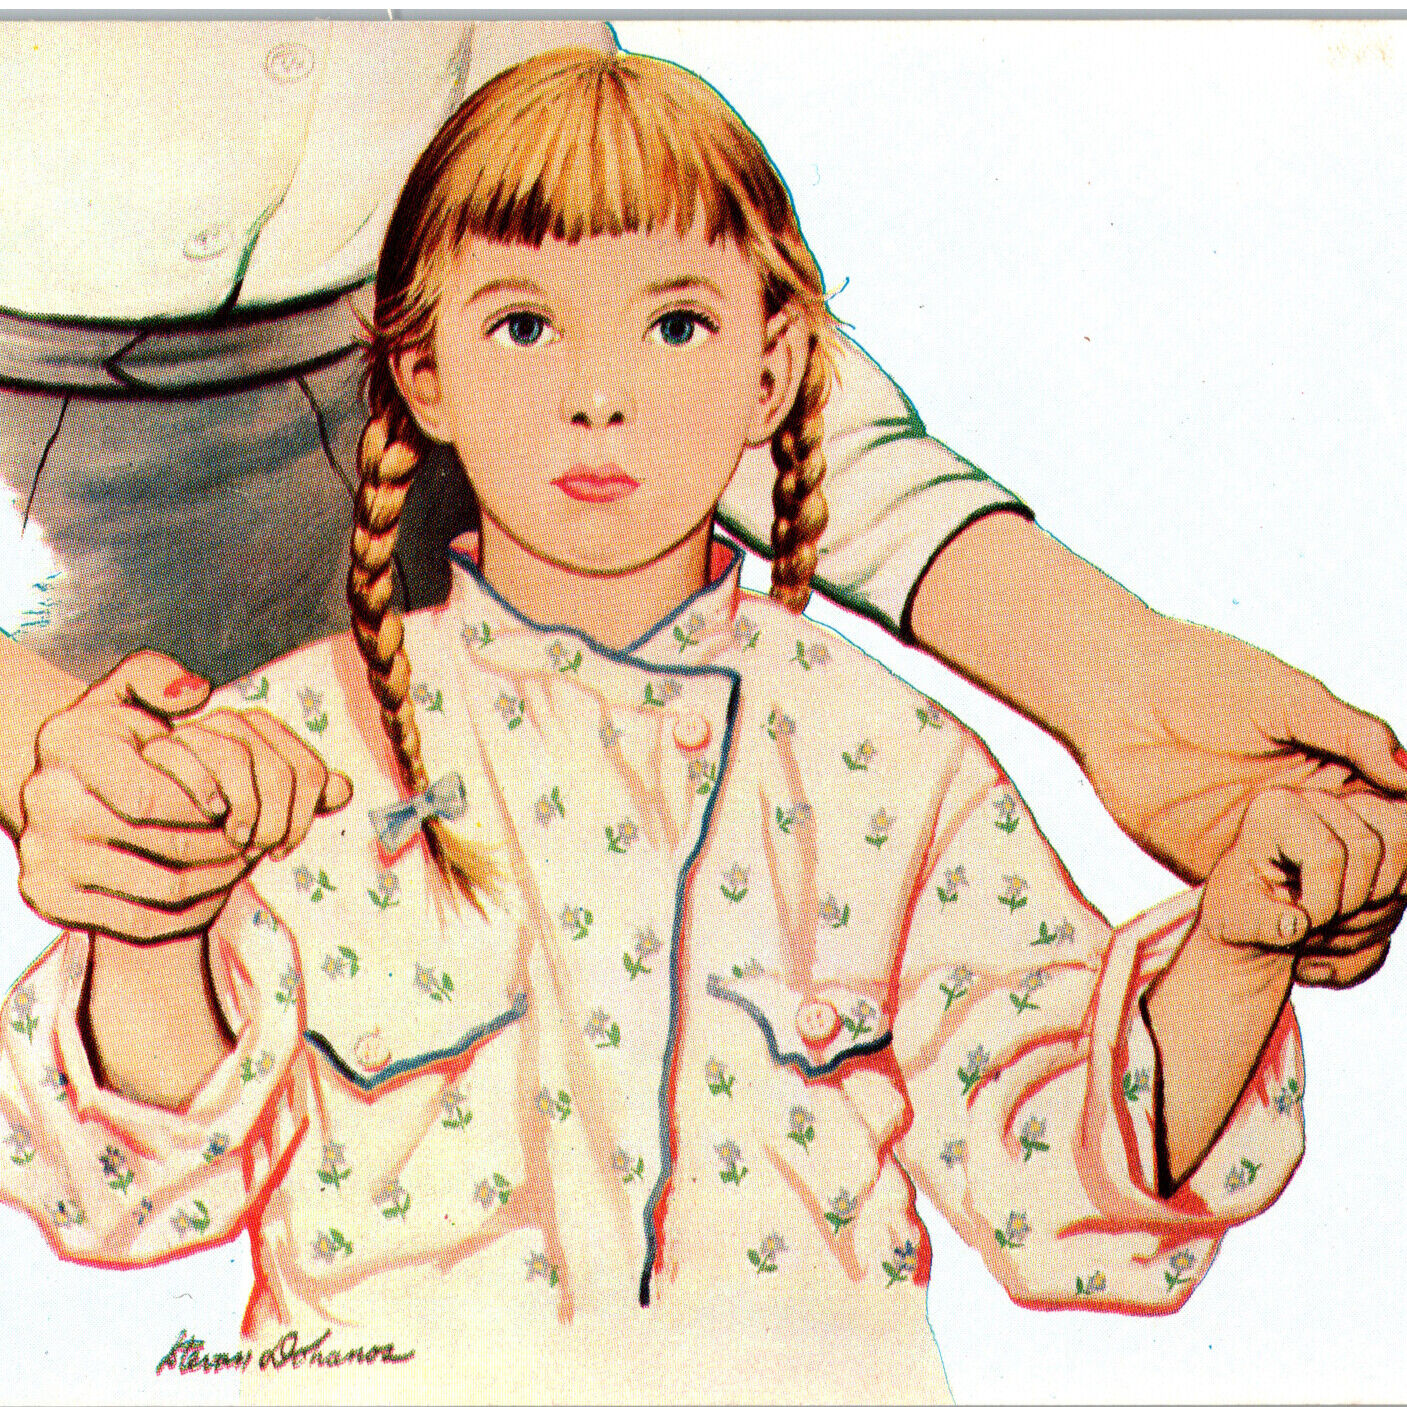 Vintage 1940s Give To United Way Charity Advertising Girl Pajama Postcard